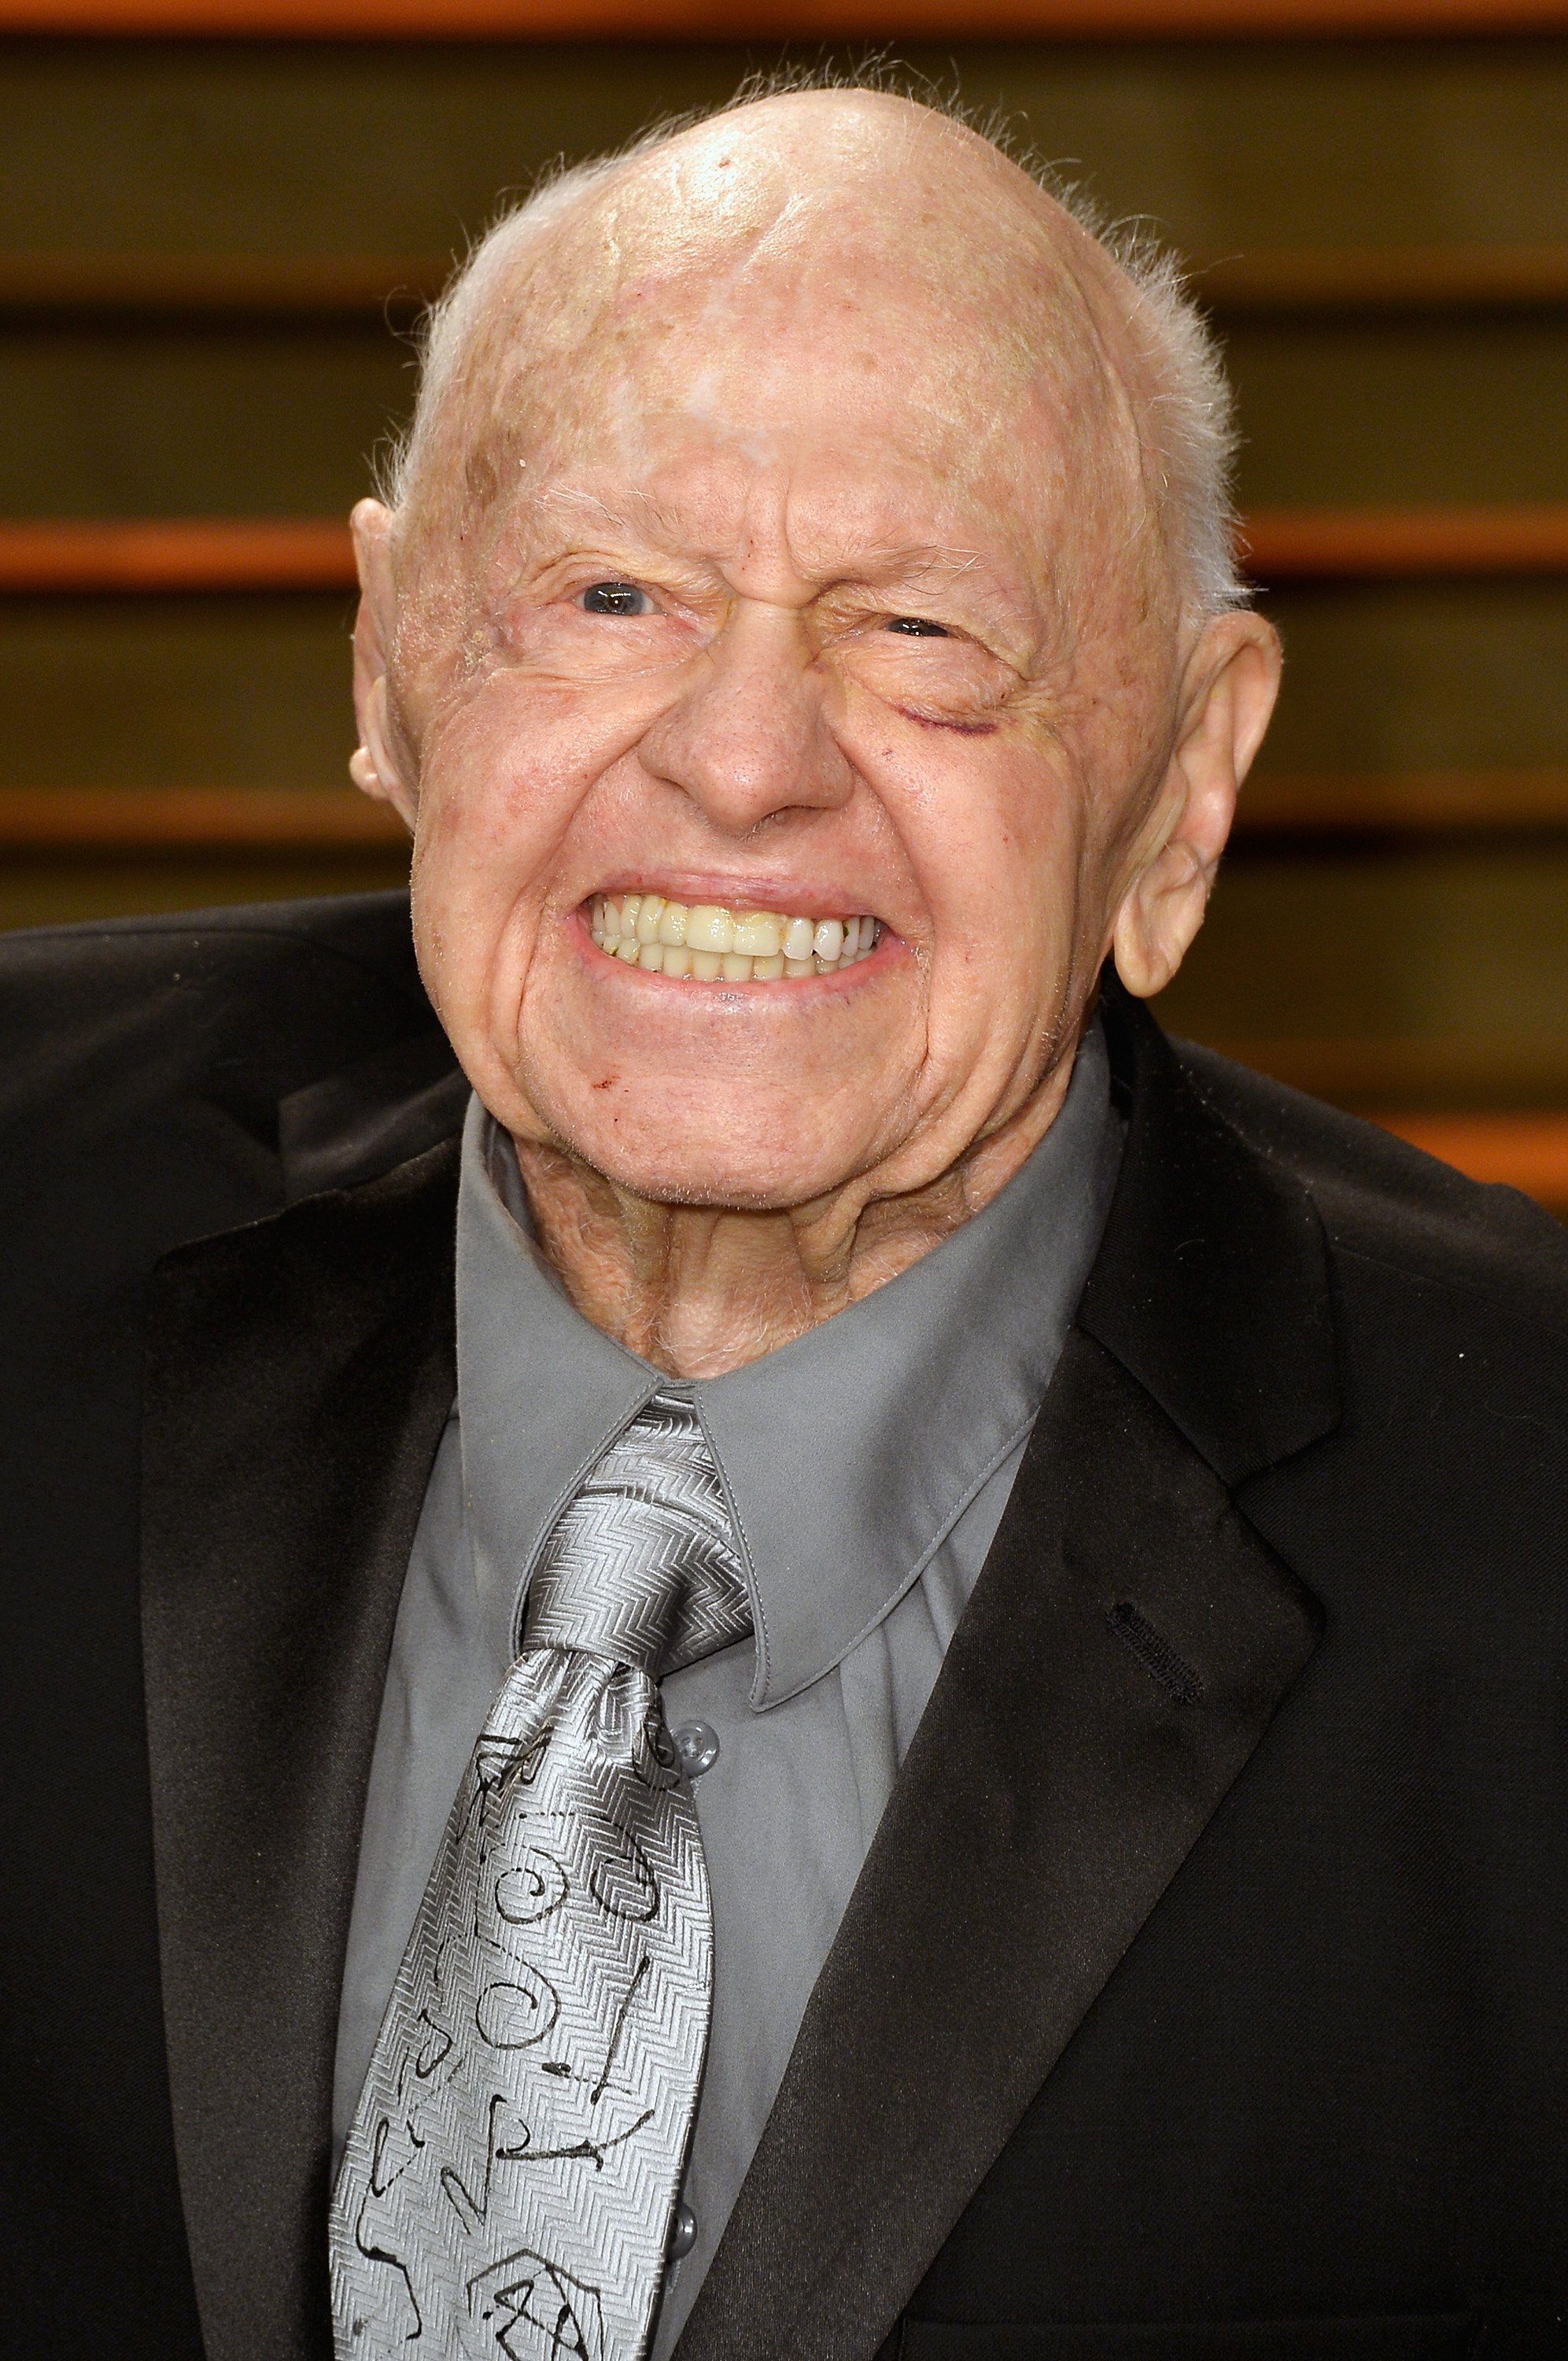 Mickey Rooney. I Image: Getty Images.